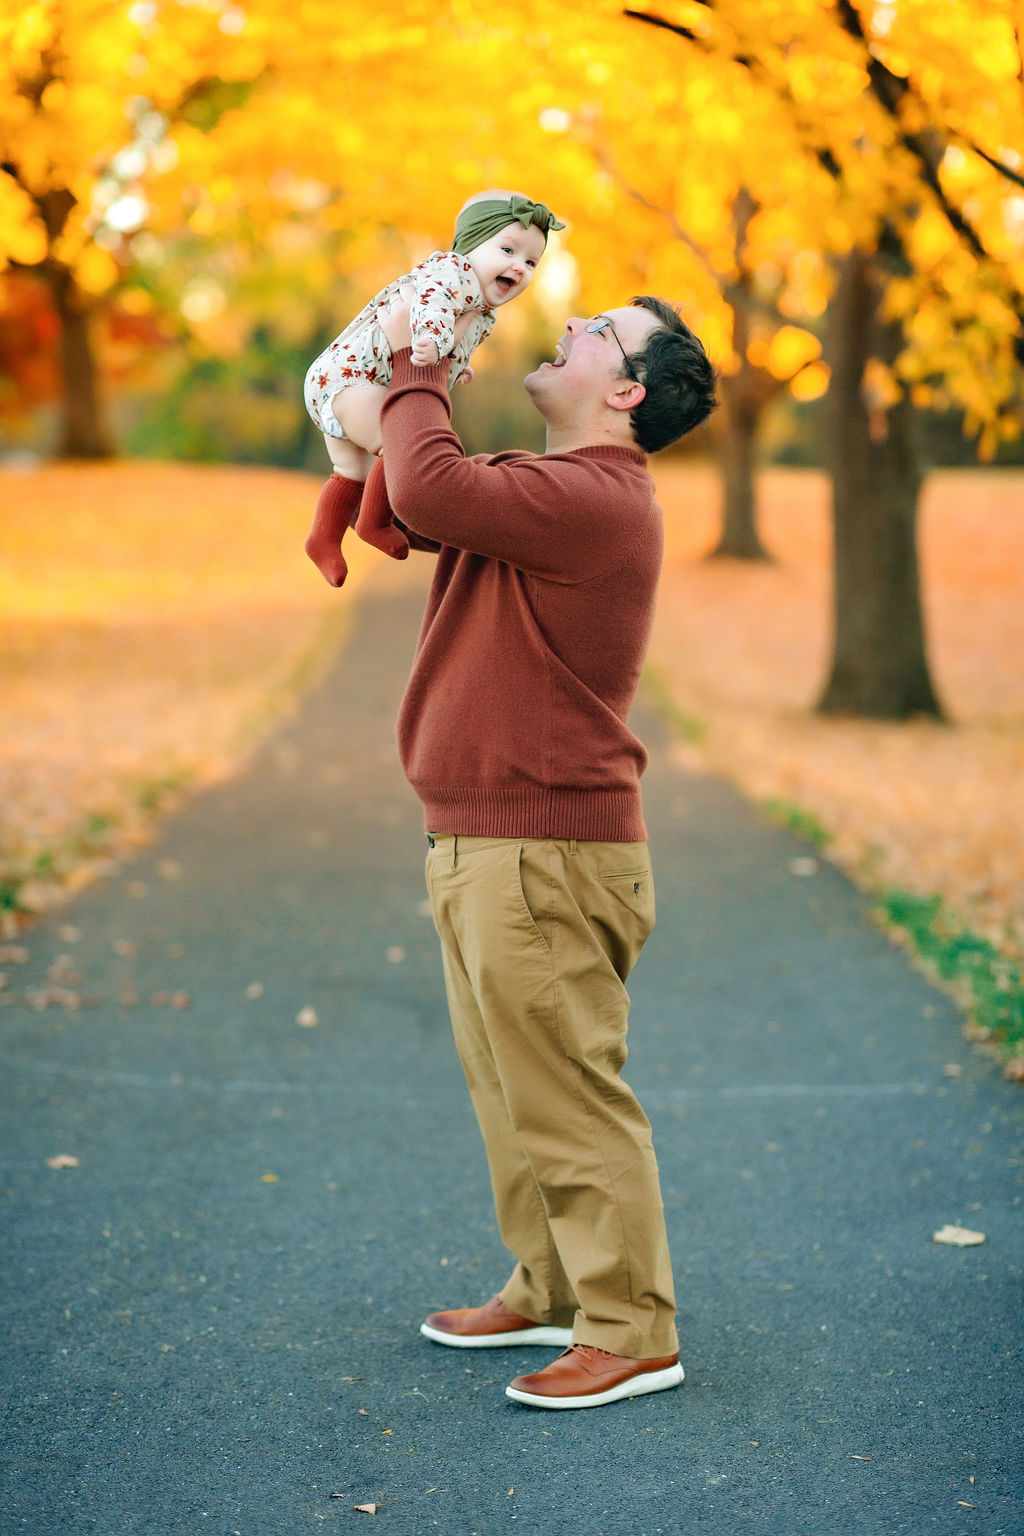 A dad and toddler daughter play in the fall on a paved park path